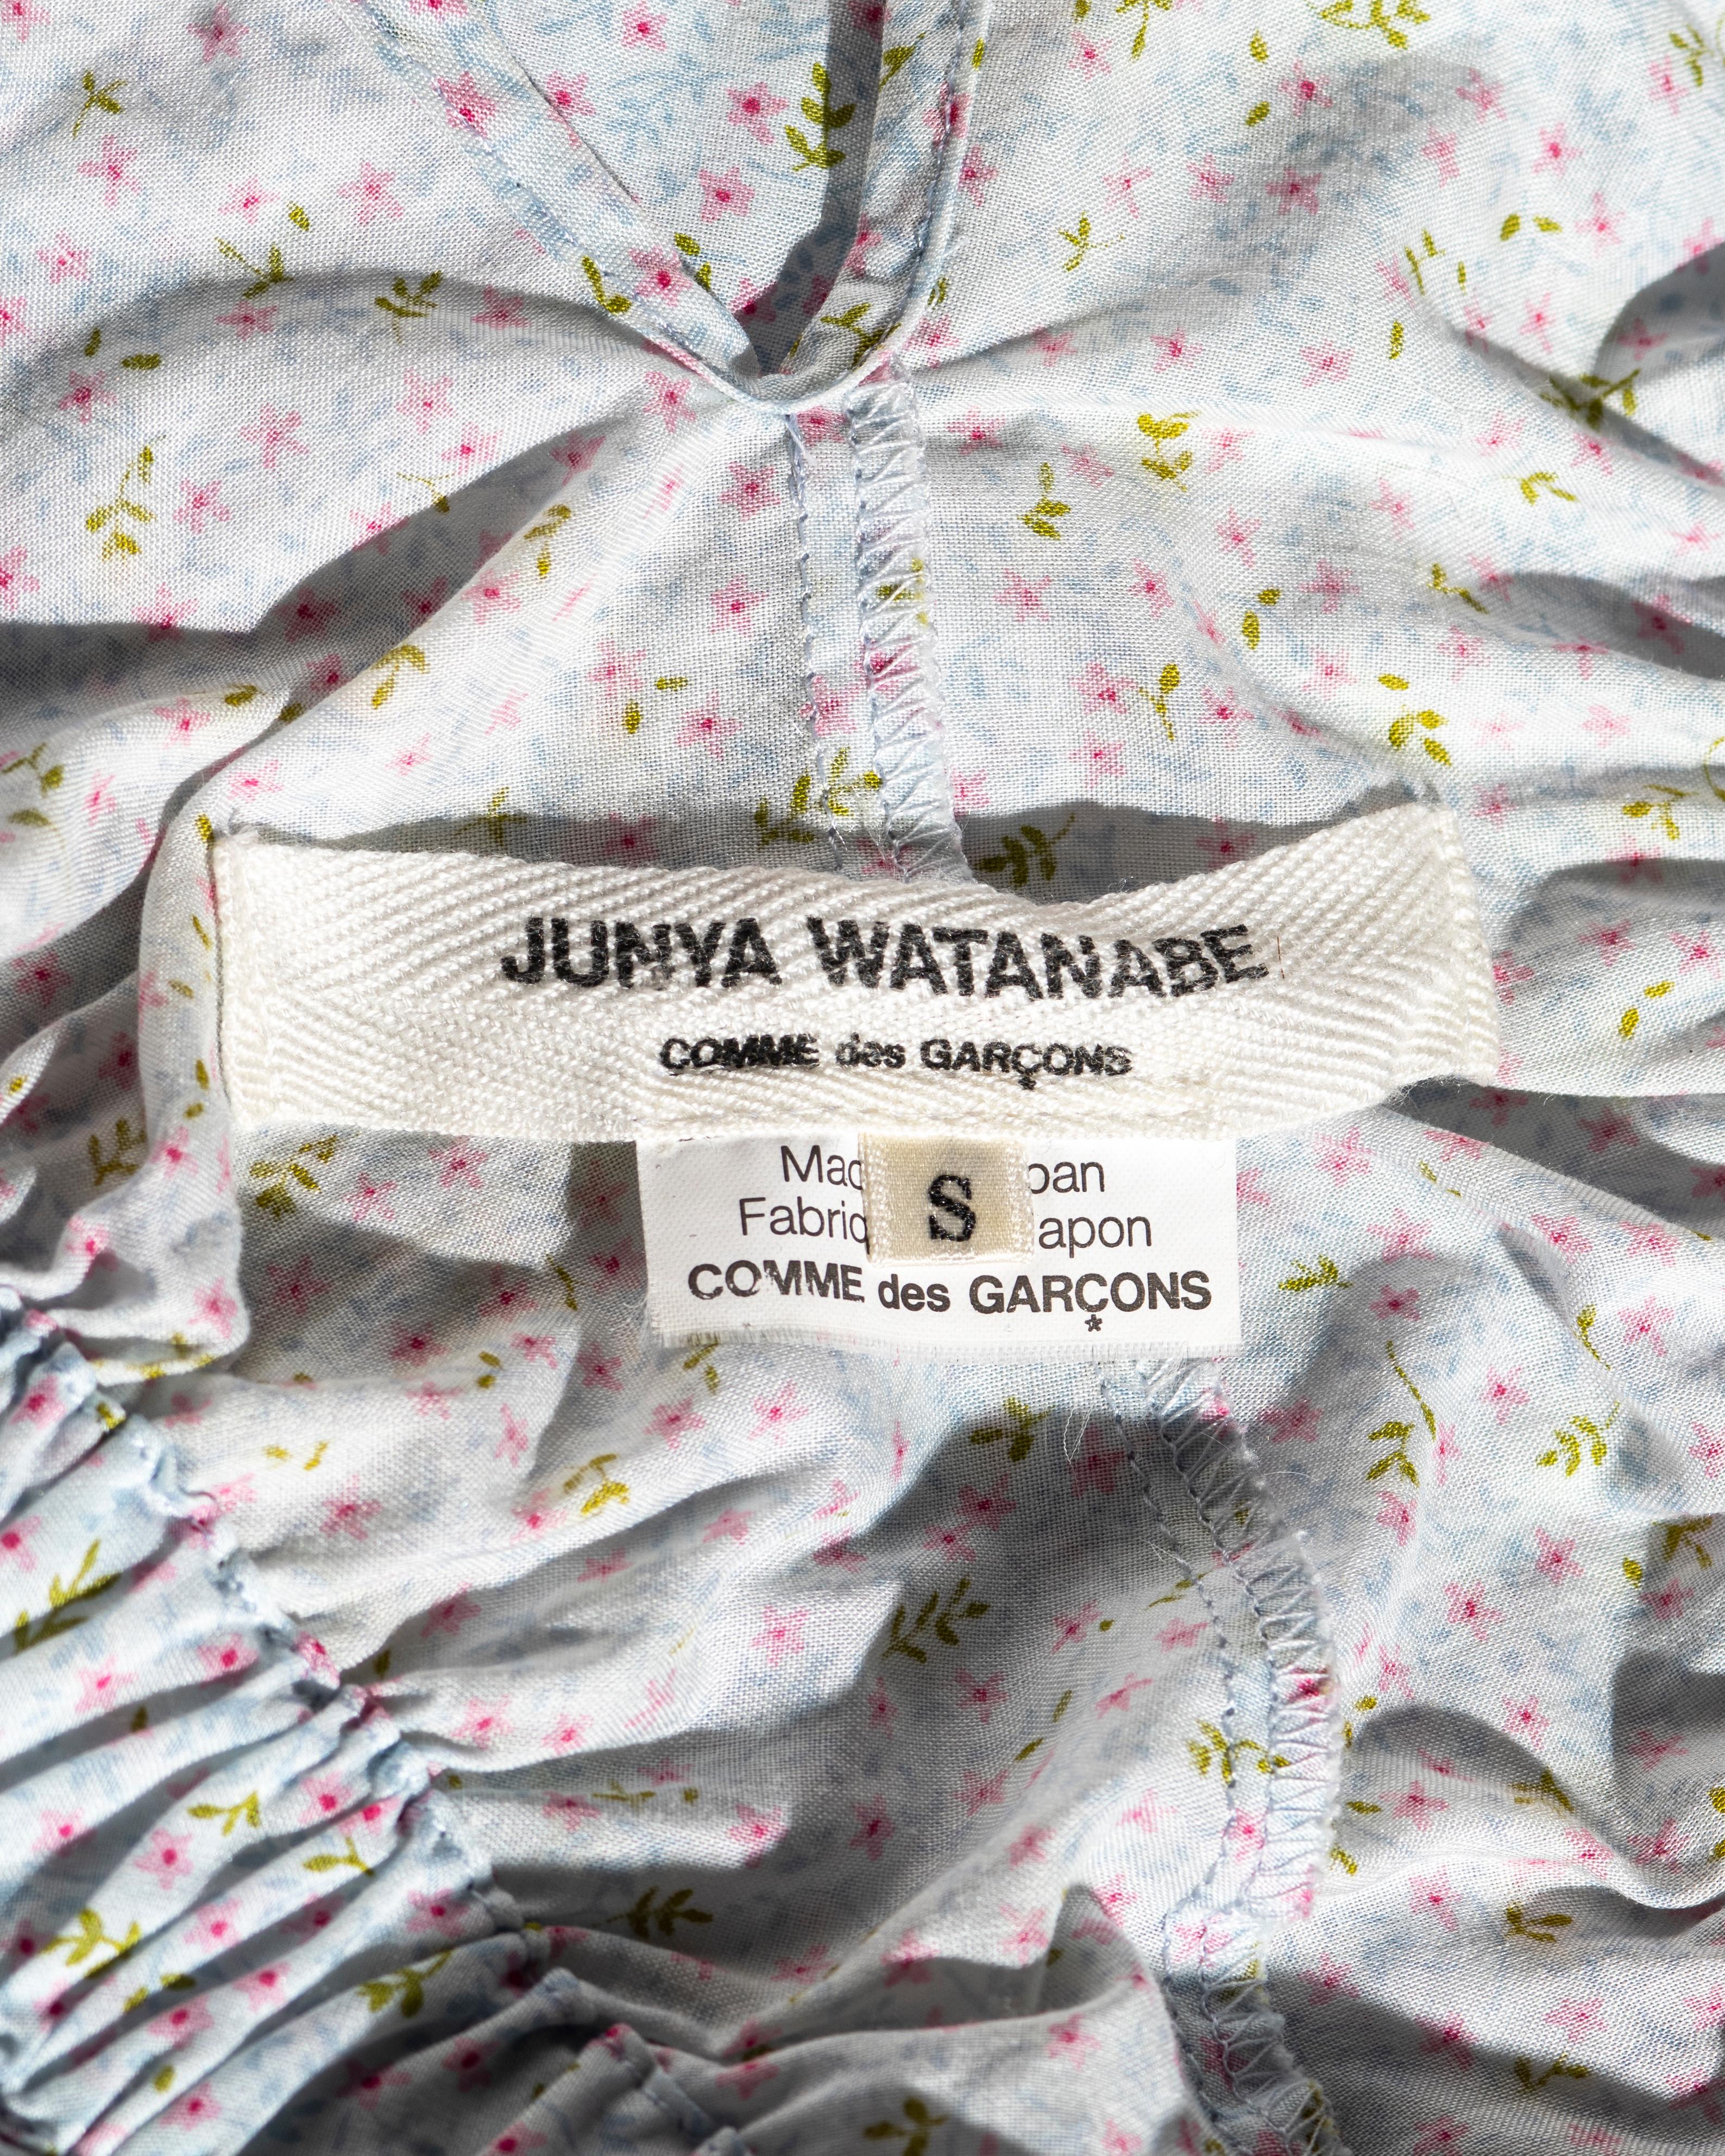 Junya Watanabe floral cotton dress with harness straps and backpack, ss 2003 For Sale 4